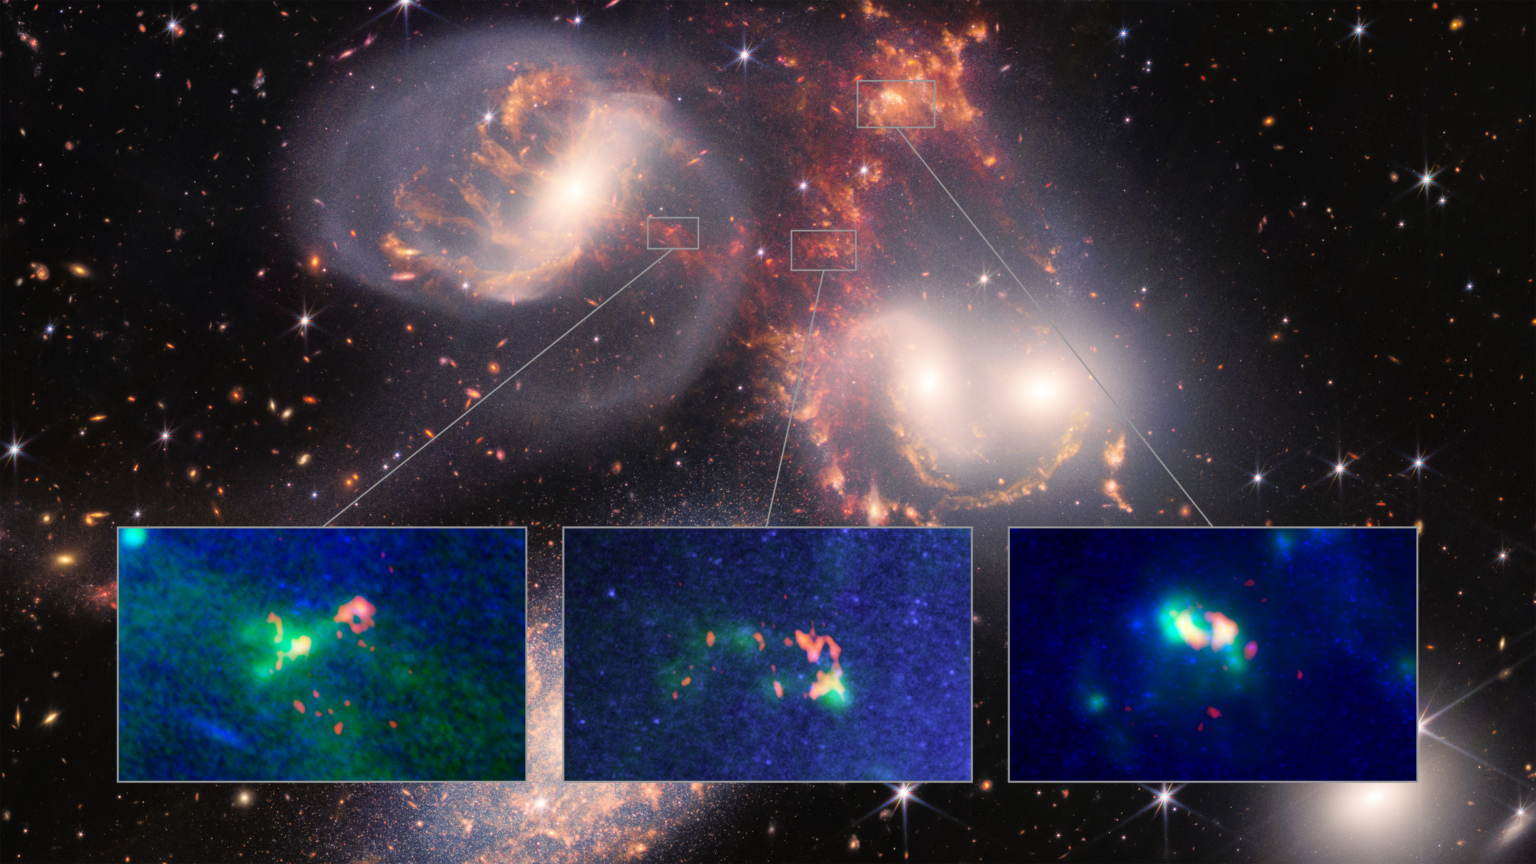 ALMA and JWST Reveal Galactic Shock is Shaping Stephan’s Quintet in Mysterious Ways